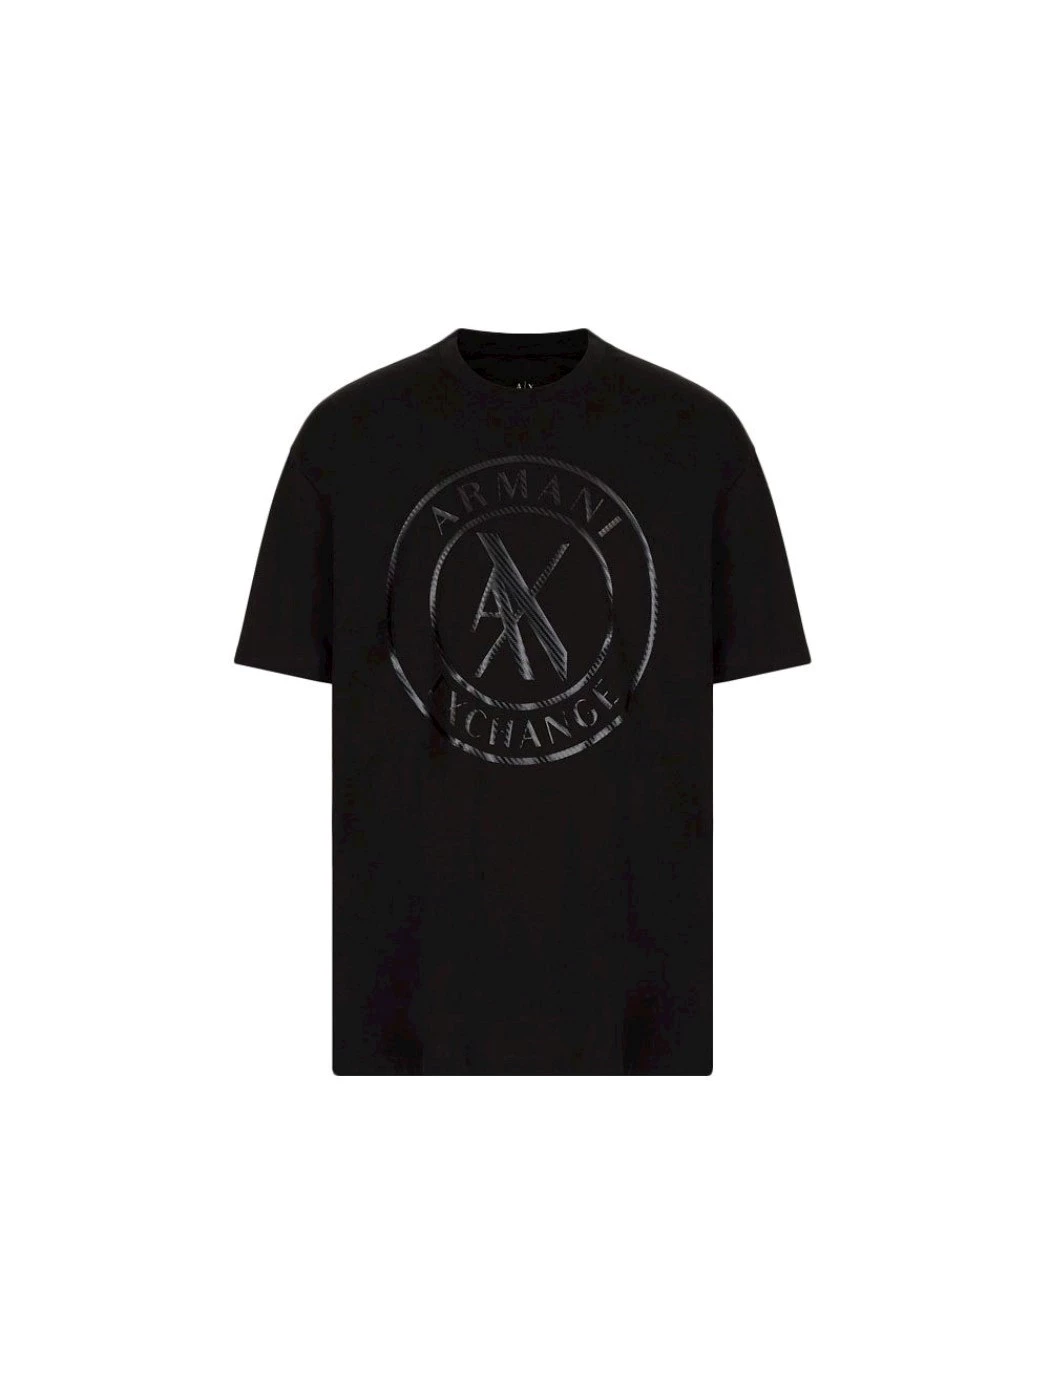 Comfort fit T-shirt in Armani Exchange cotton jersey